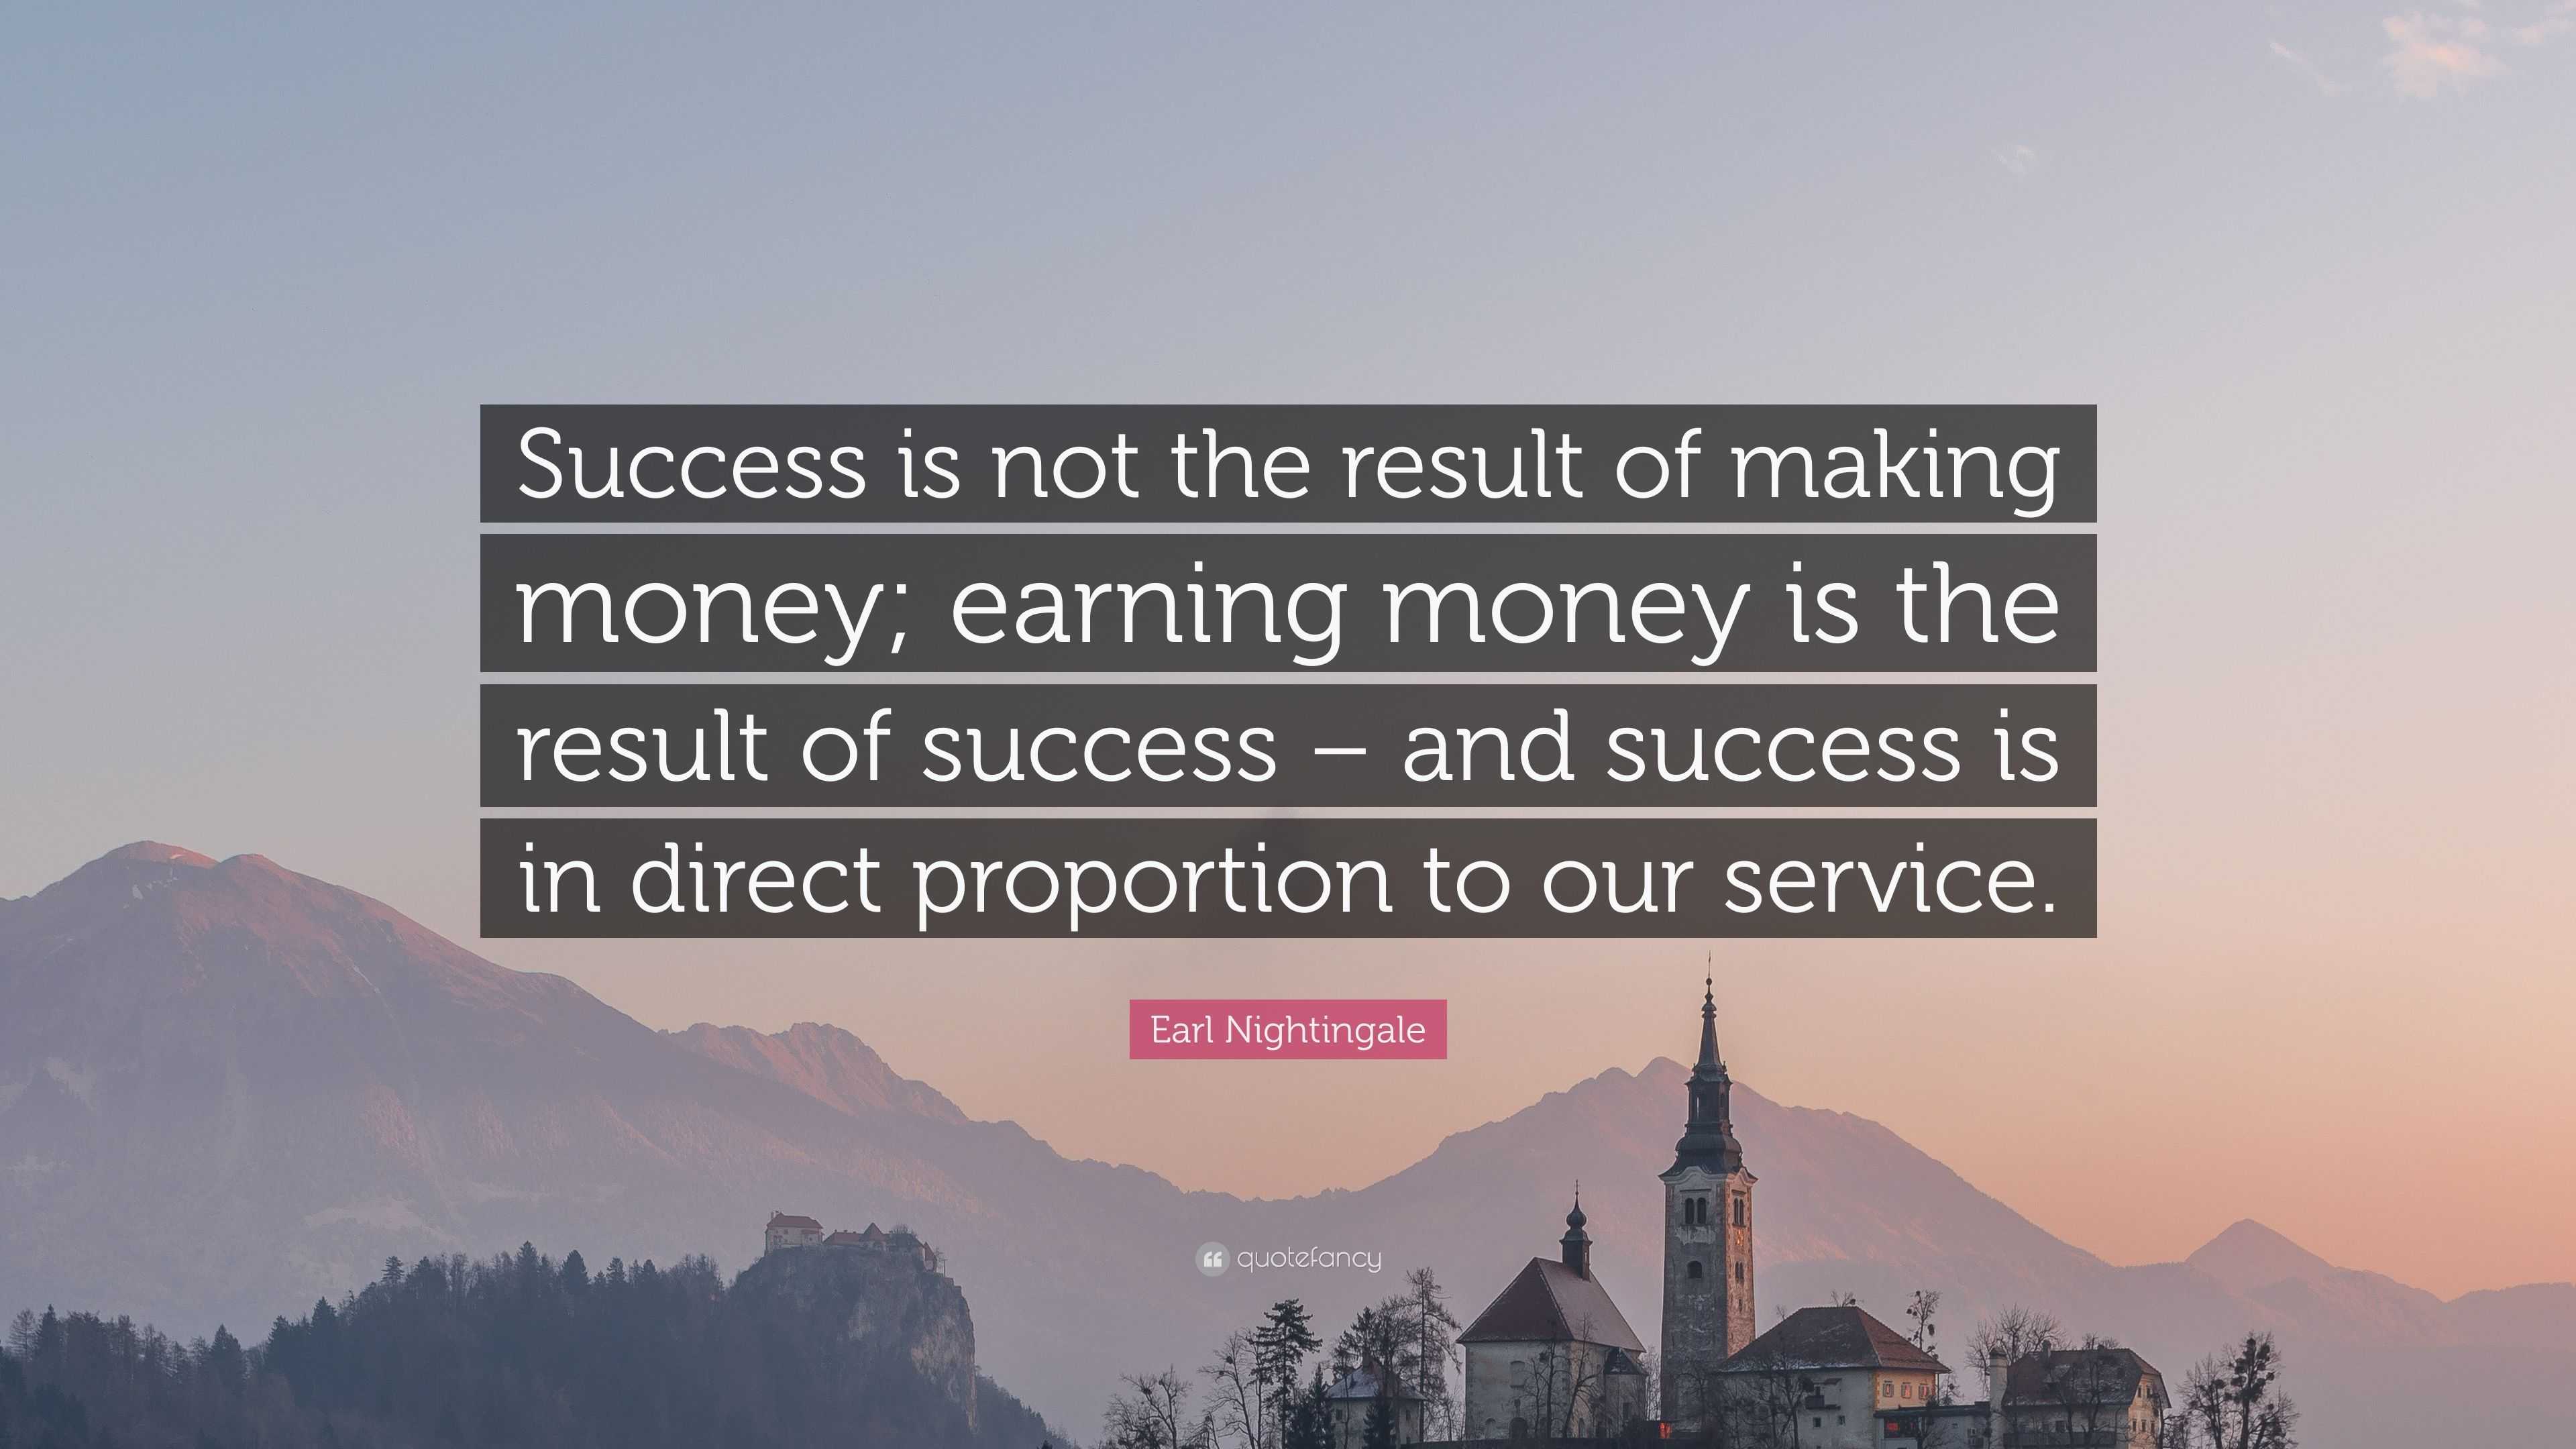 success means not earning more money